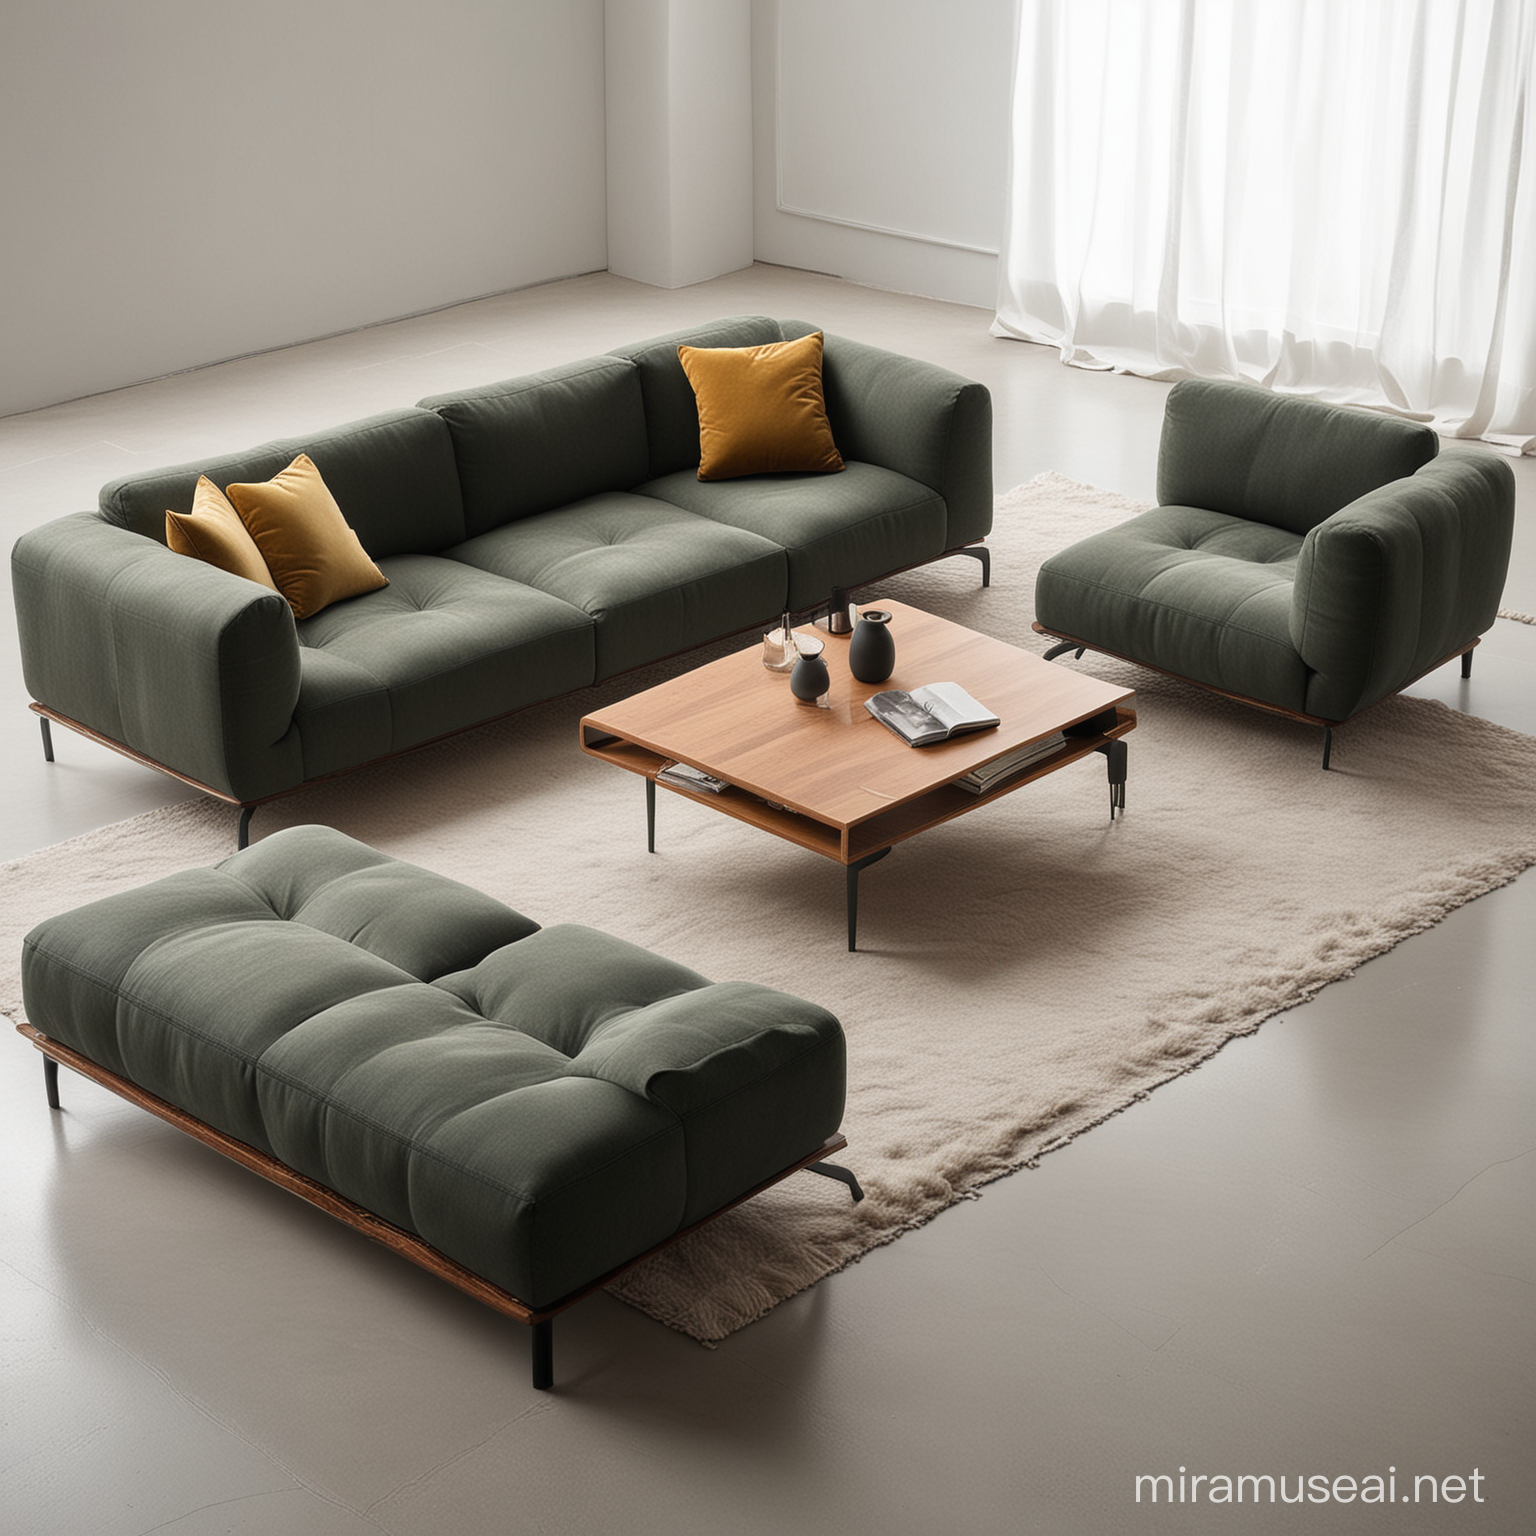 Exotic Villa Modular Seating Group Stylish 2025 Design with Dark Gray and Olive OilColored Fabric